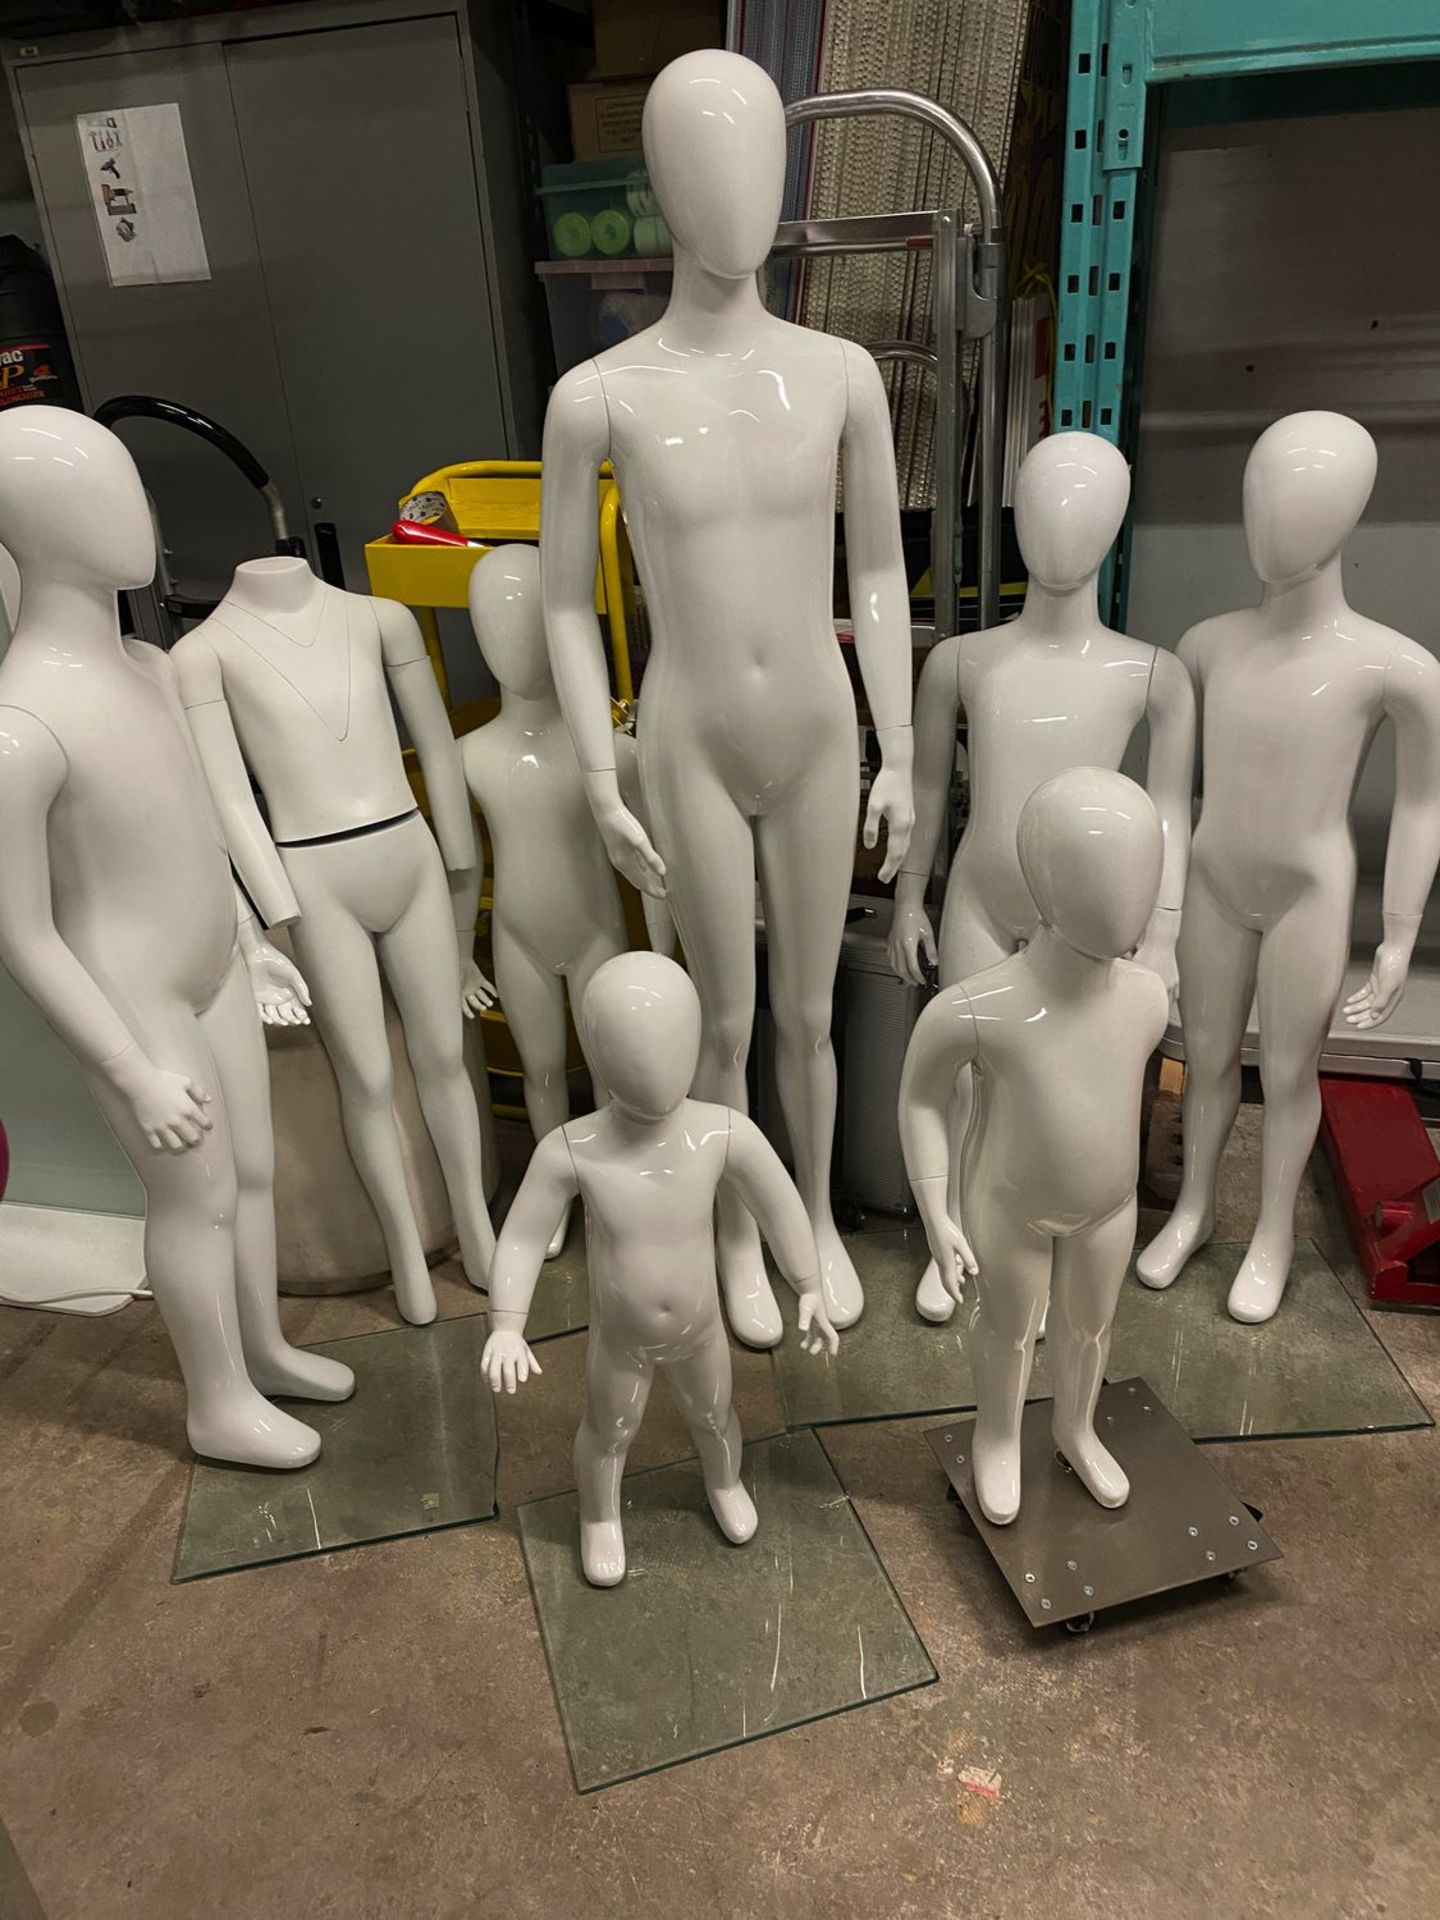 LOT - (8) ASSORTED MANNEQUINS, (5) GLASS BASES, (1) ROLLING METAL BASE, & (1) WHITE OTTOMAN